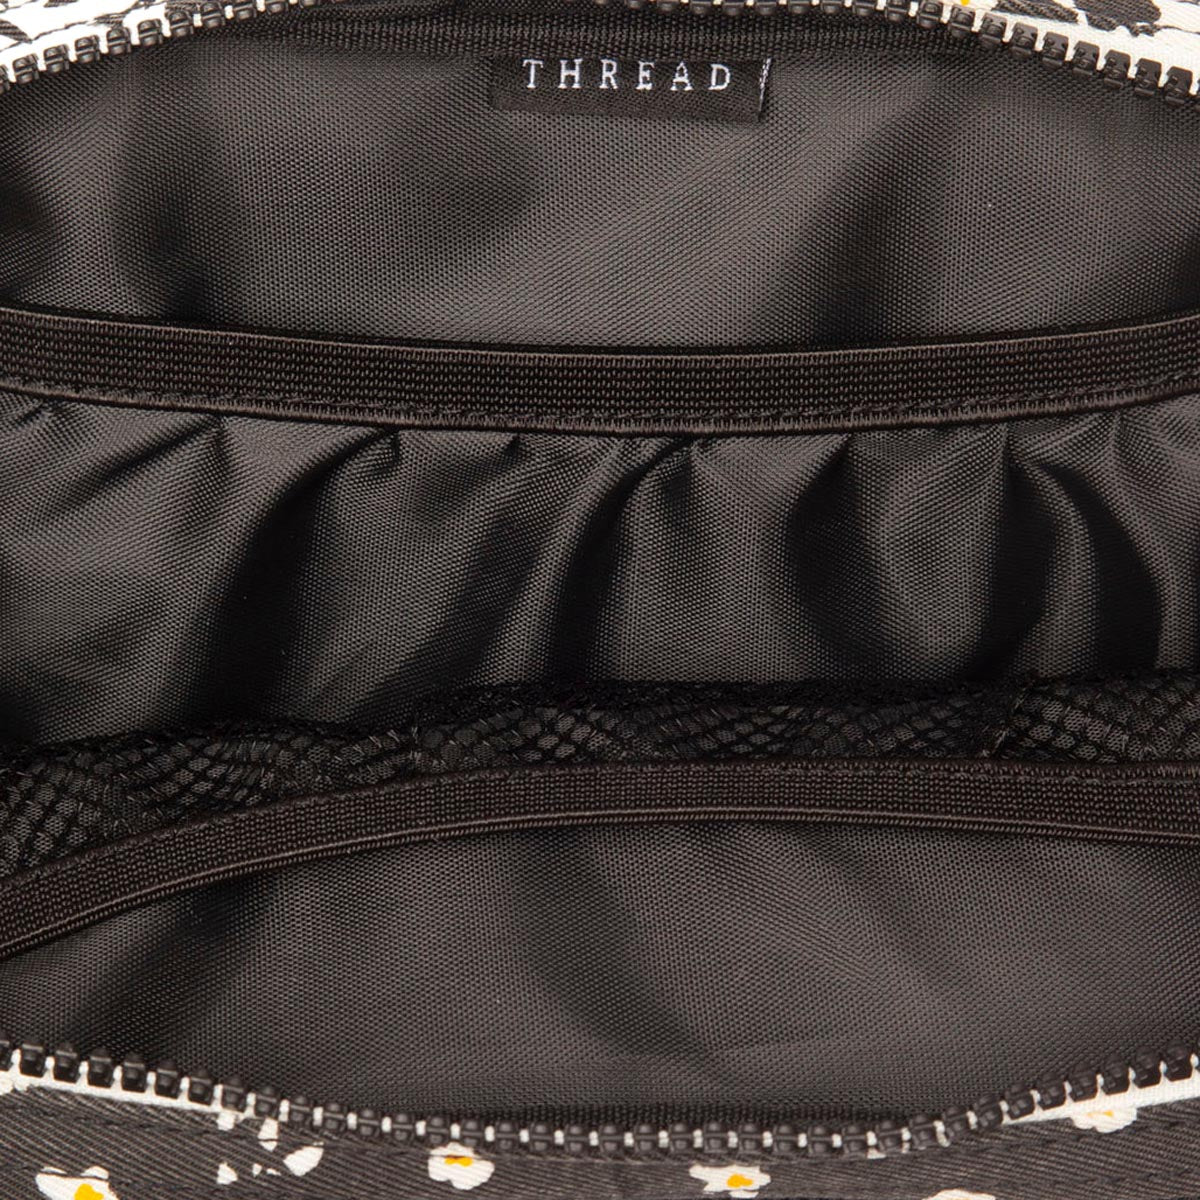 Thread Fanny Pack Bag - Colby image 3